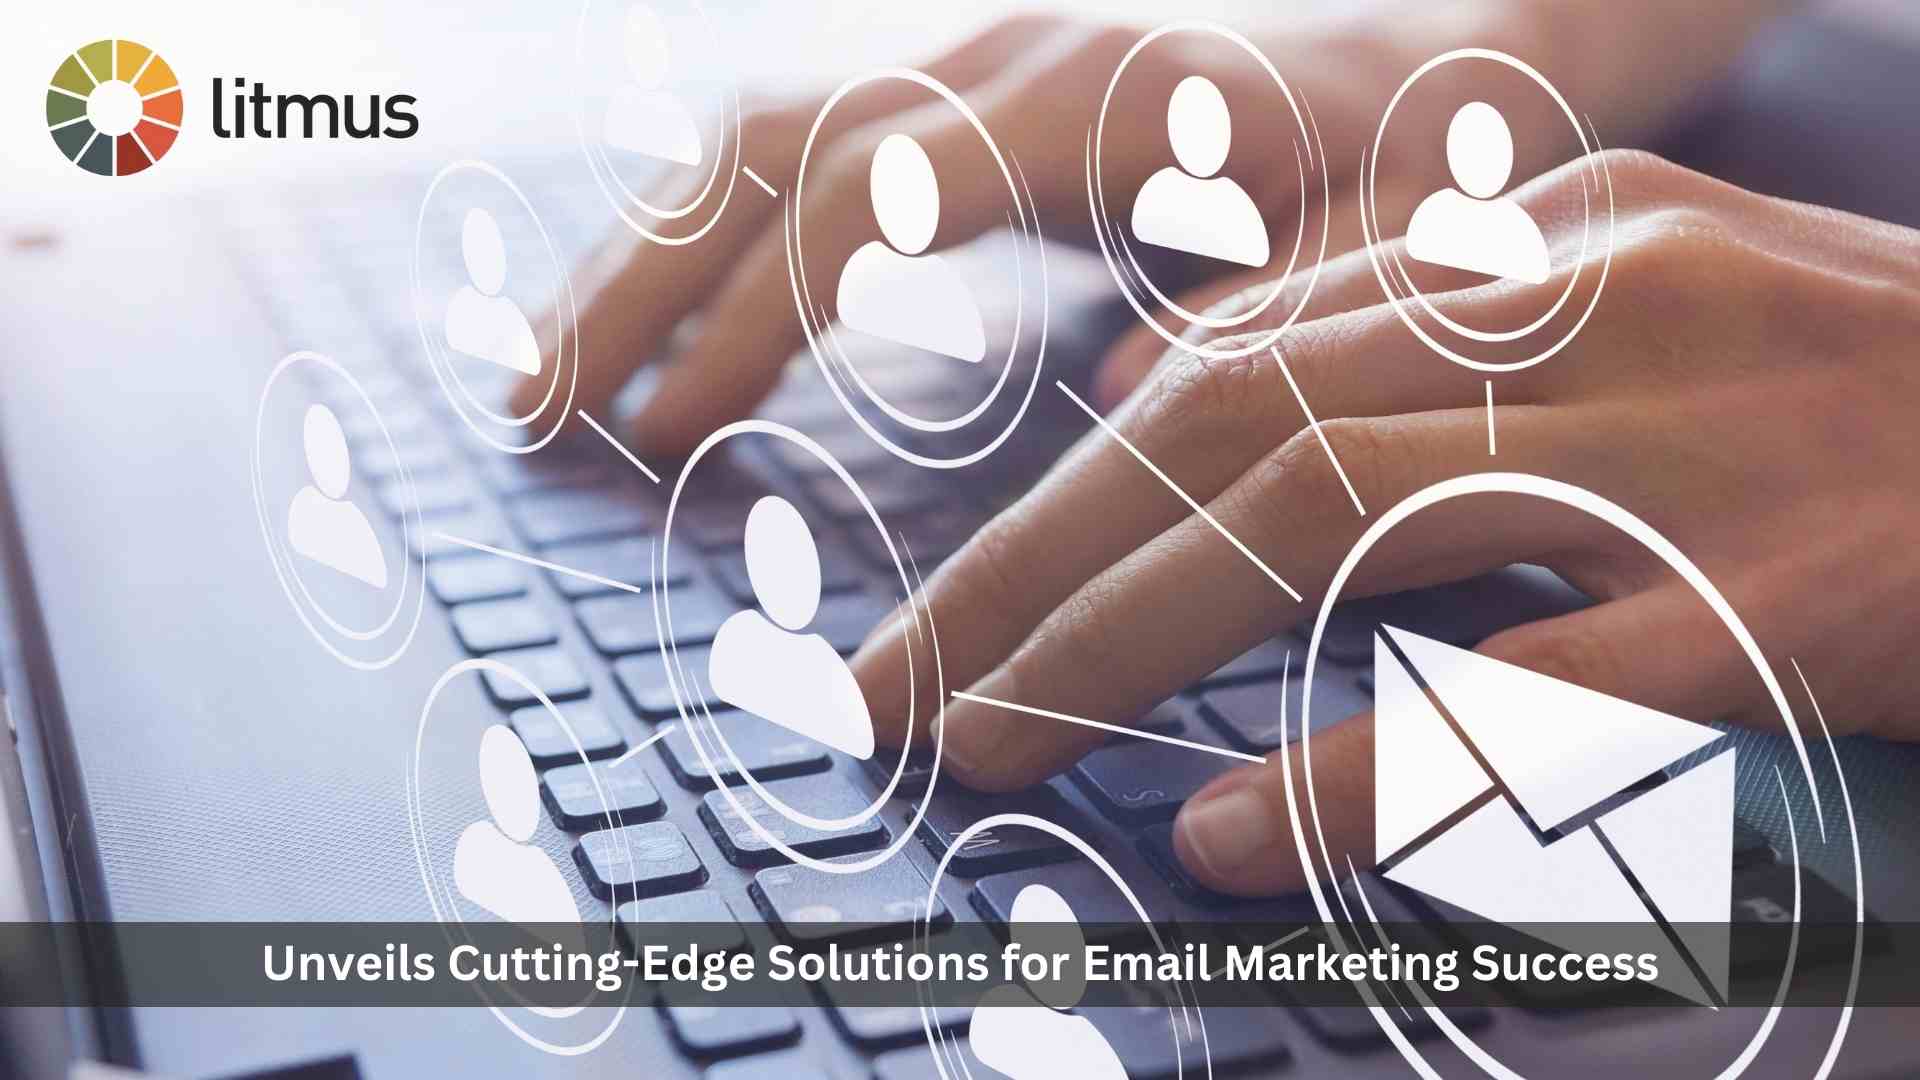 Litmus Unveils Cutting-Edge Solutions for Email Marketing Success